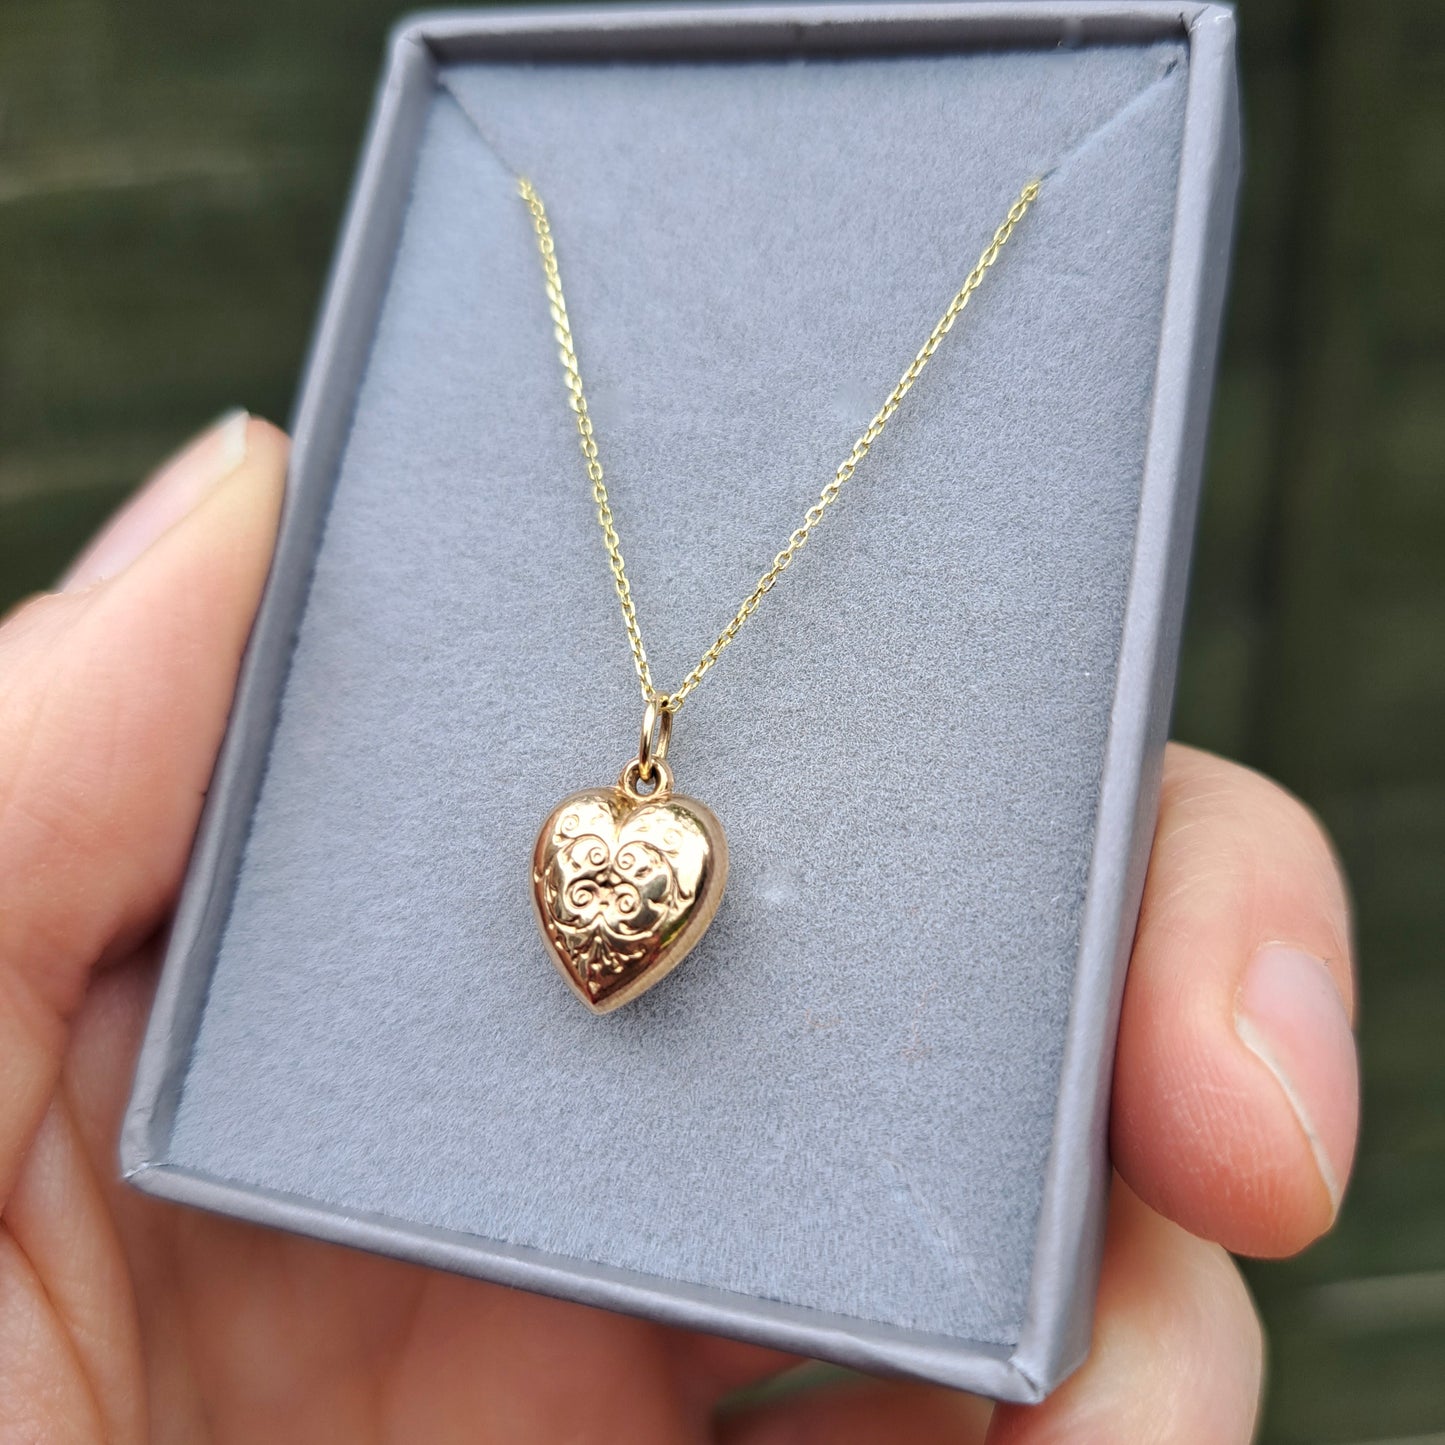 Vintage 1960s 9ct Gold Engraved Puffy Heart Charm, 11mm